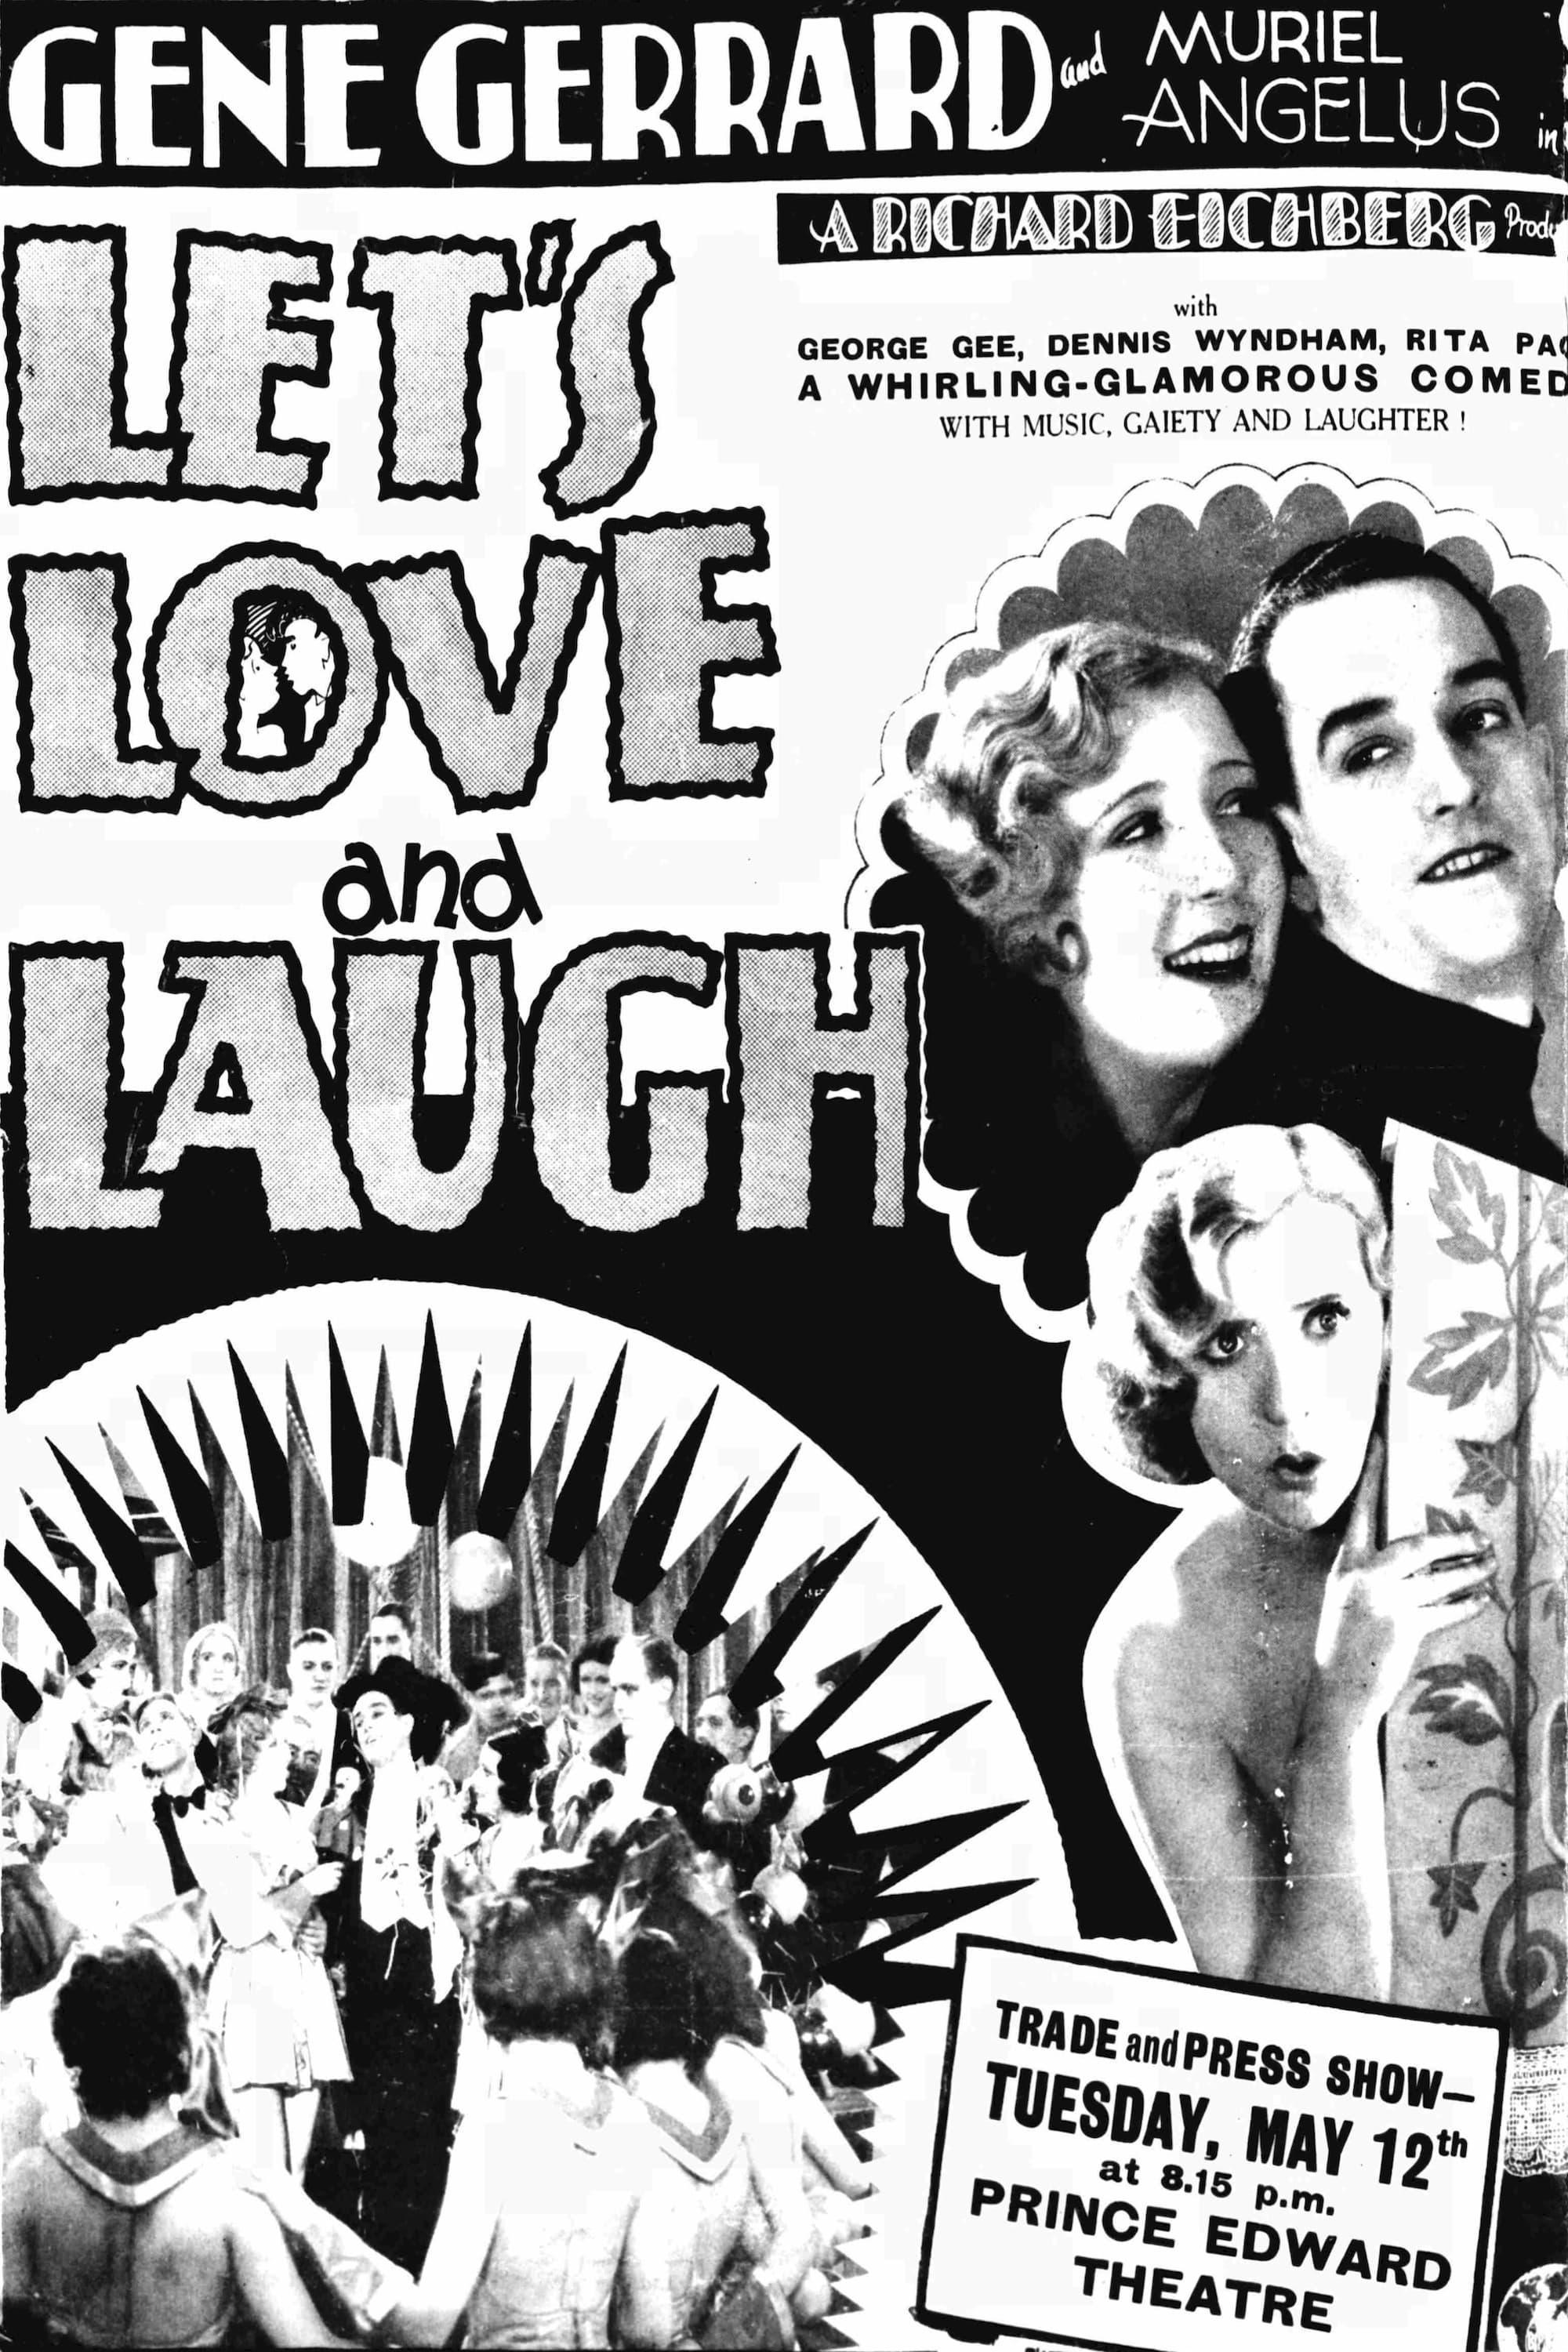 Let's Love and Laugh poster